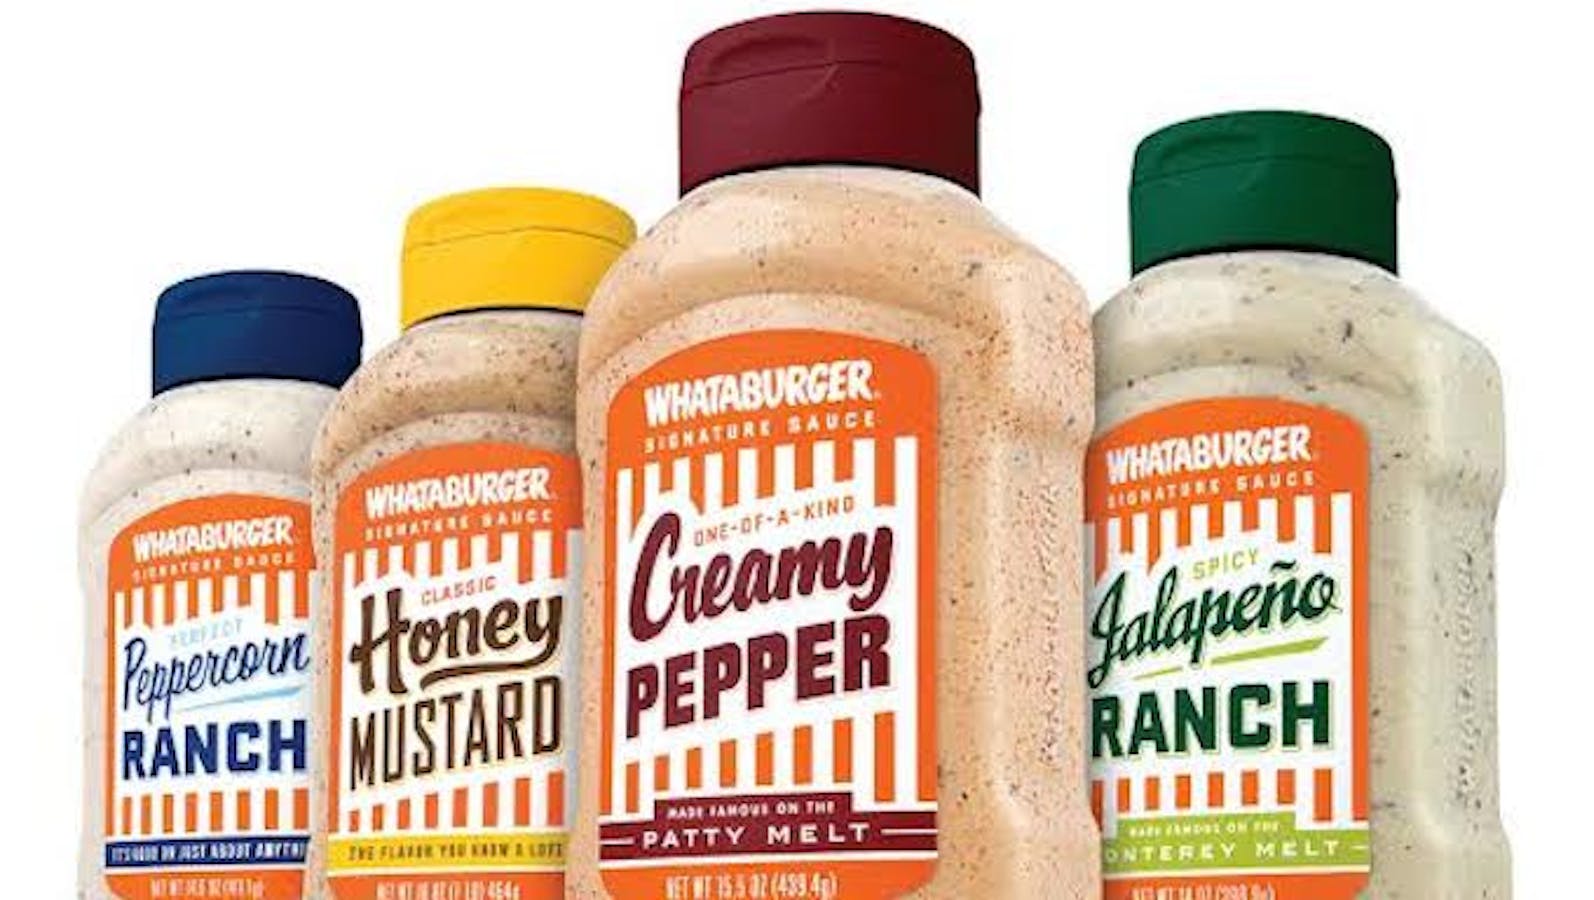 Why Whataburger Ketchup Is Better Than the Rest